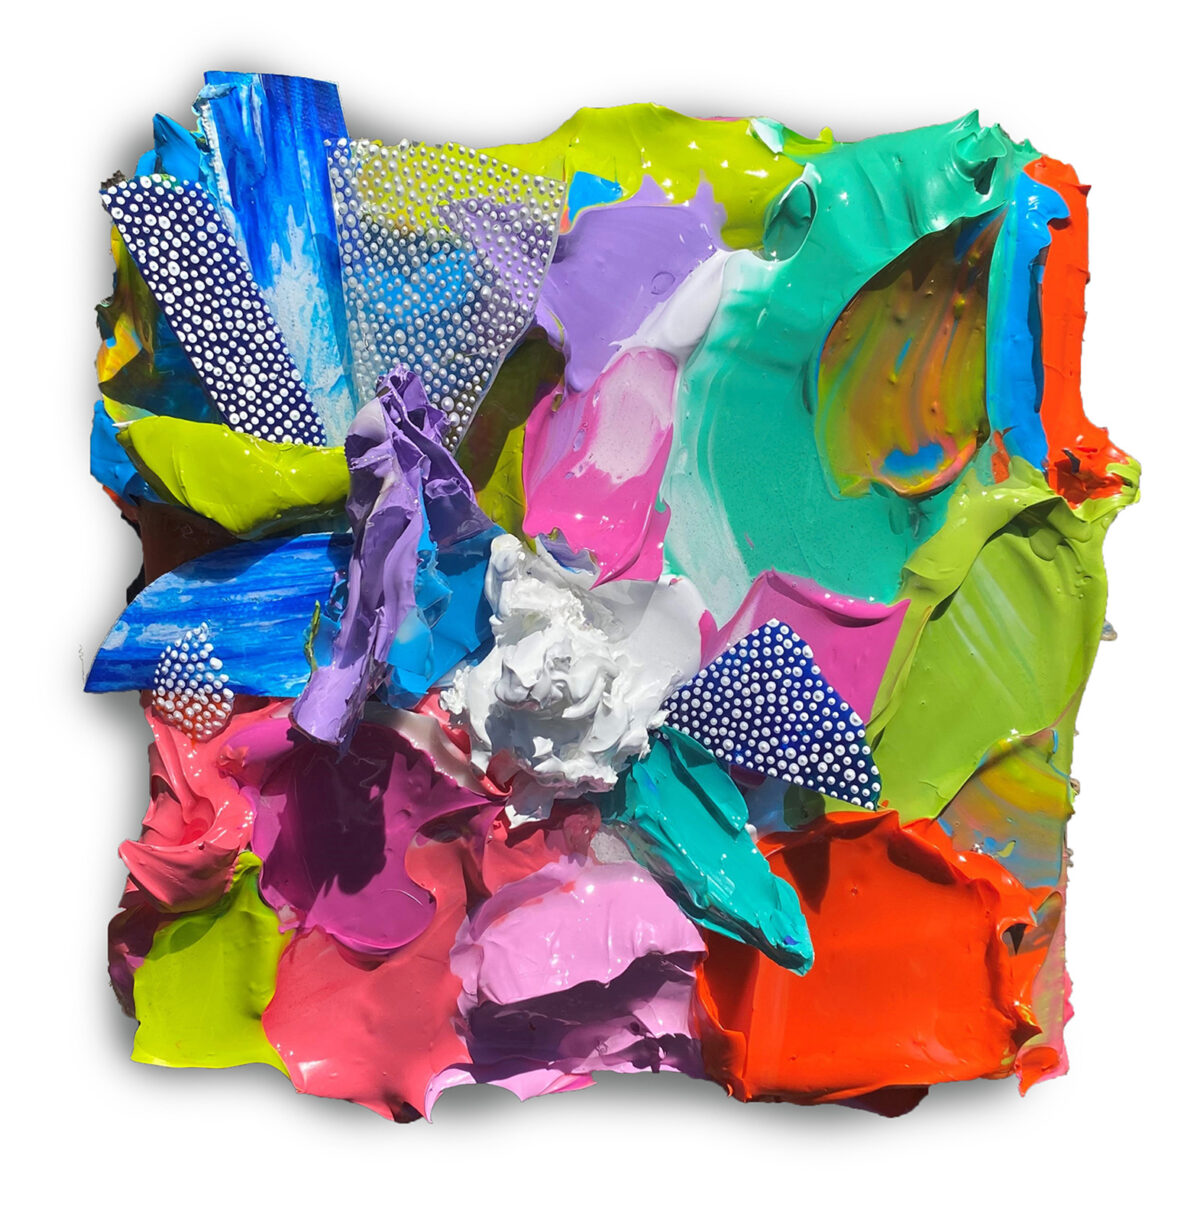 404. REBECCA PIERCE - Somersault 4 - 22 x 22cm acrylic and resin on canvas - 330.00AUD